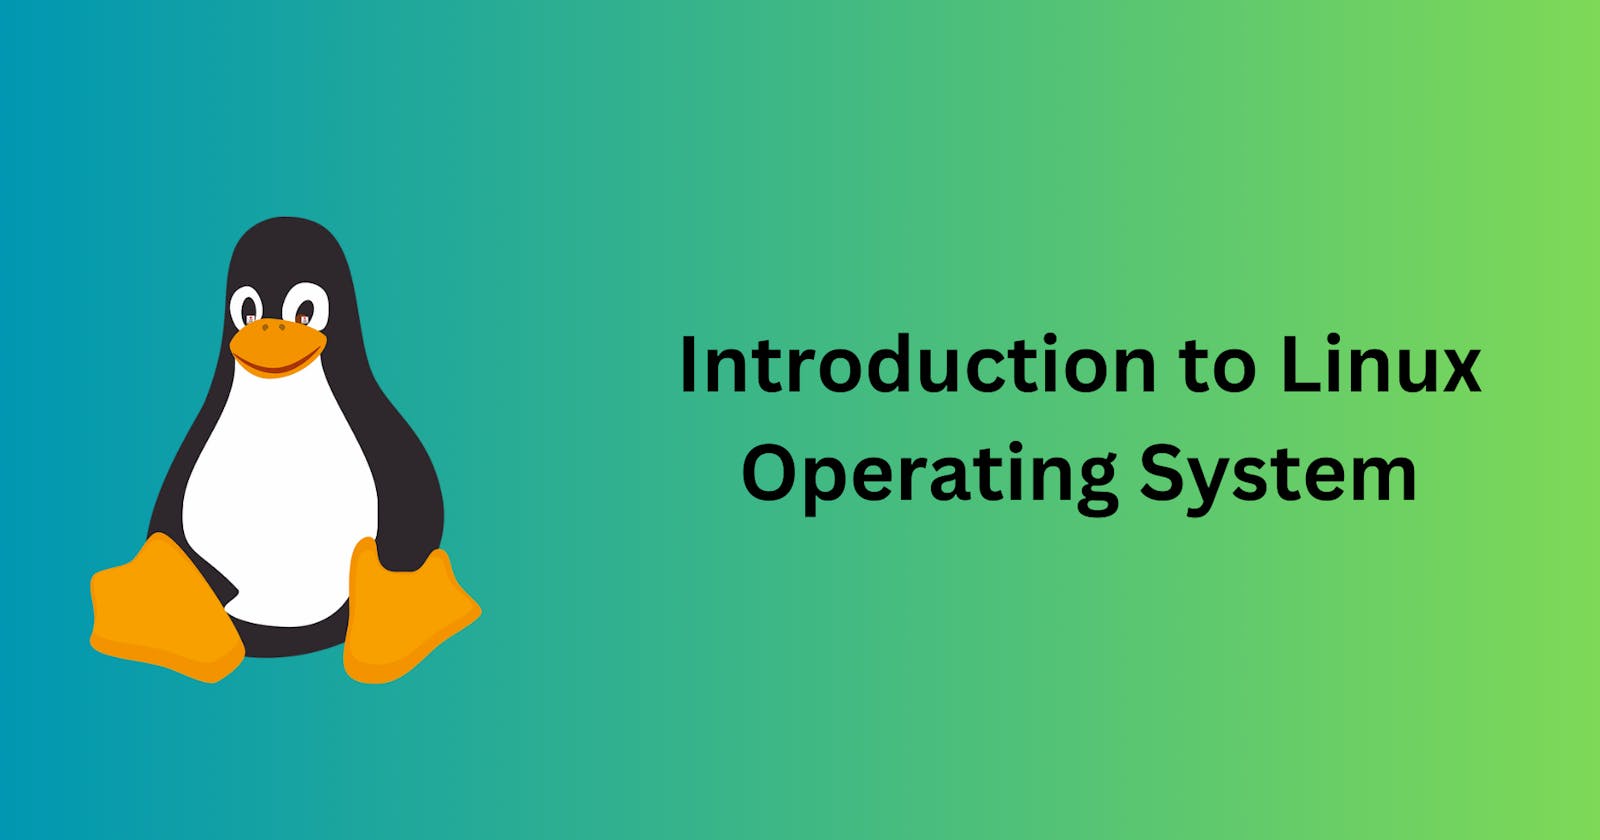 Introduction to Linux Operating System